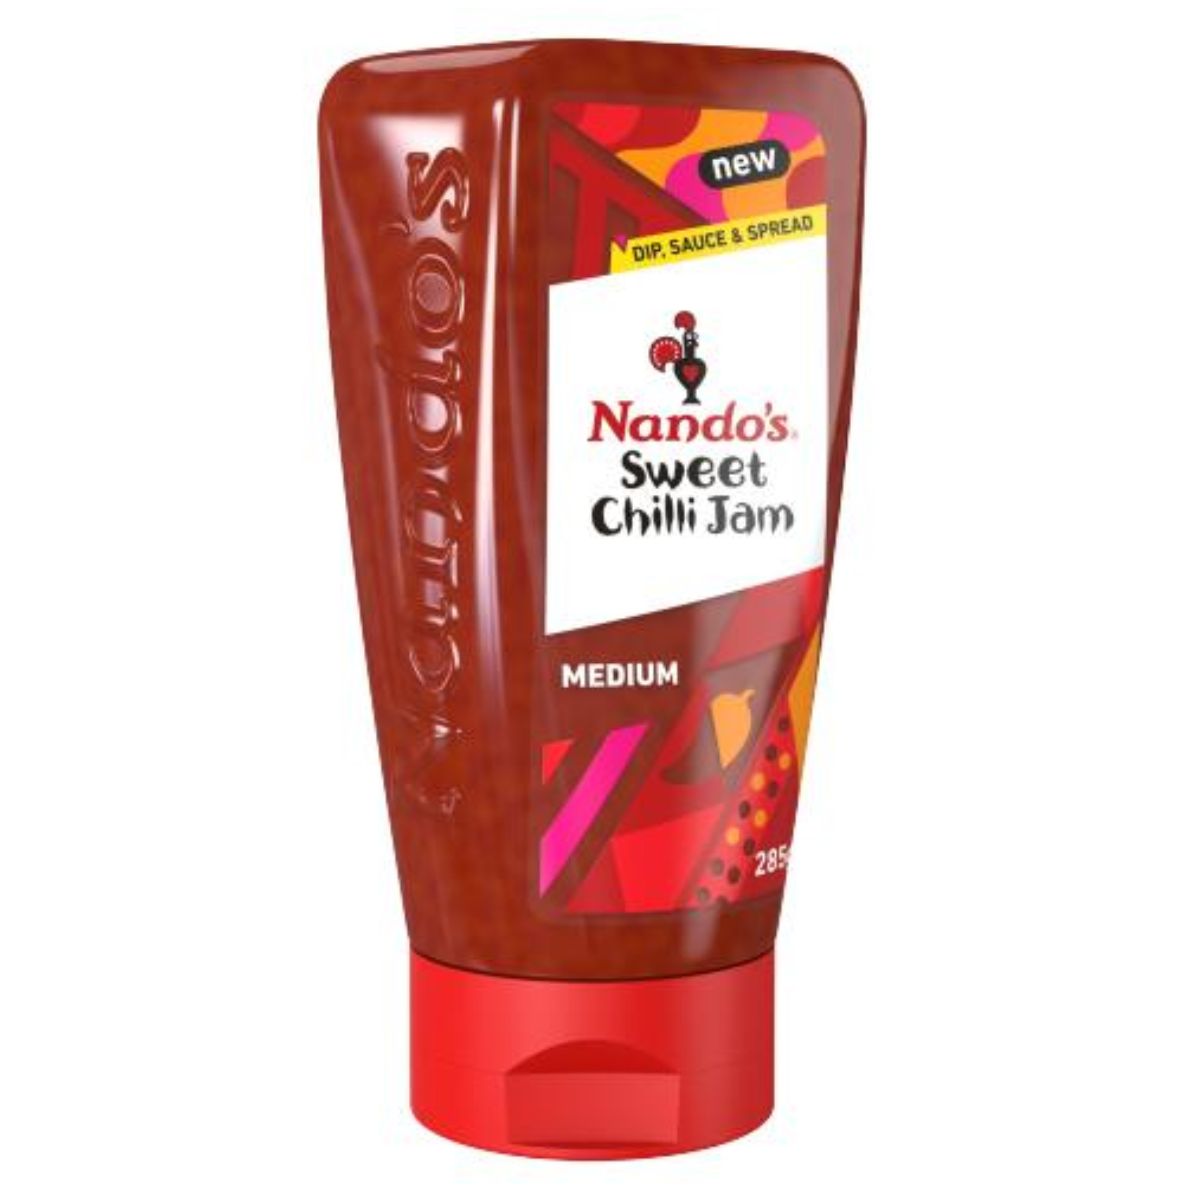 A 285g bottle of Nandos - Sweet Chilli Jam - 285g, labeled medium, featuring a red cap and colorful packaging with the text "new" and "dip, sauce & spread." This sweet and spicy jam provides a perfect balance of flavor for any dish.